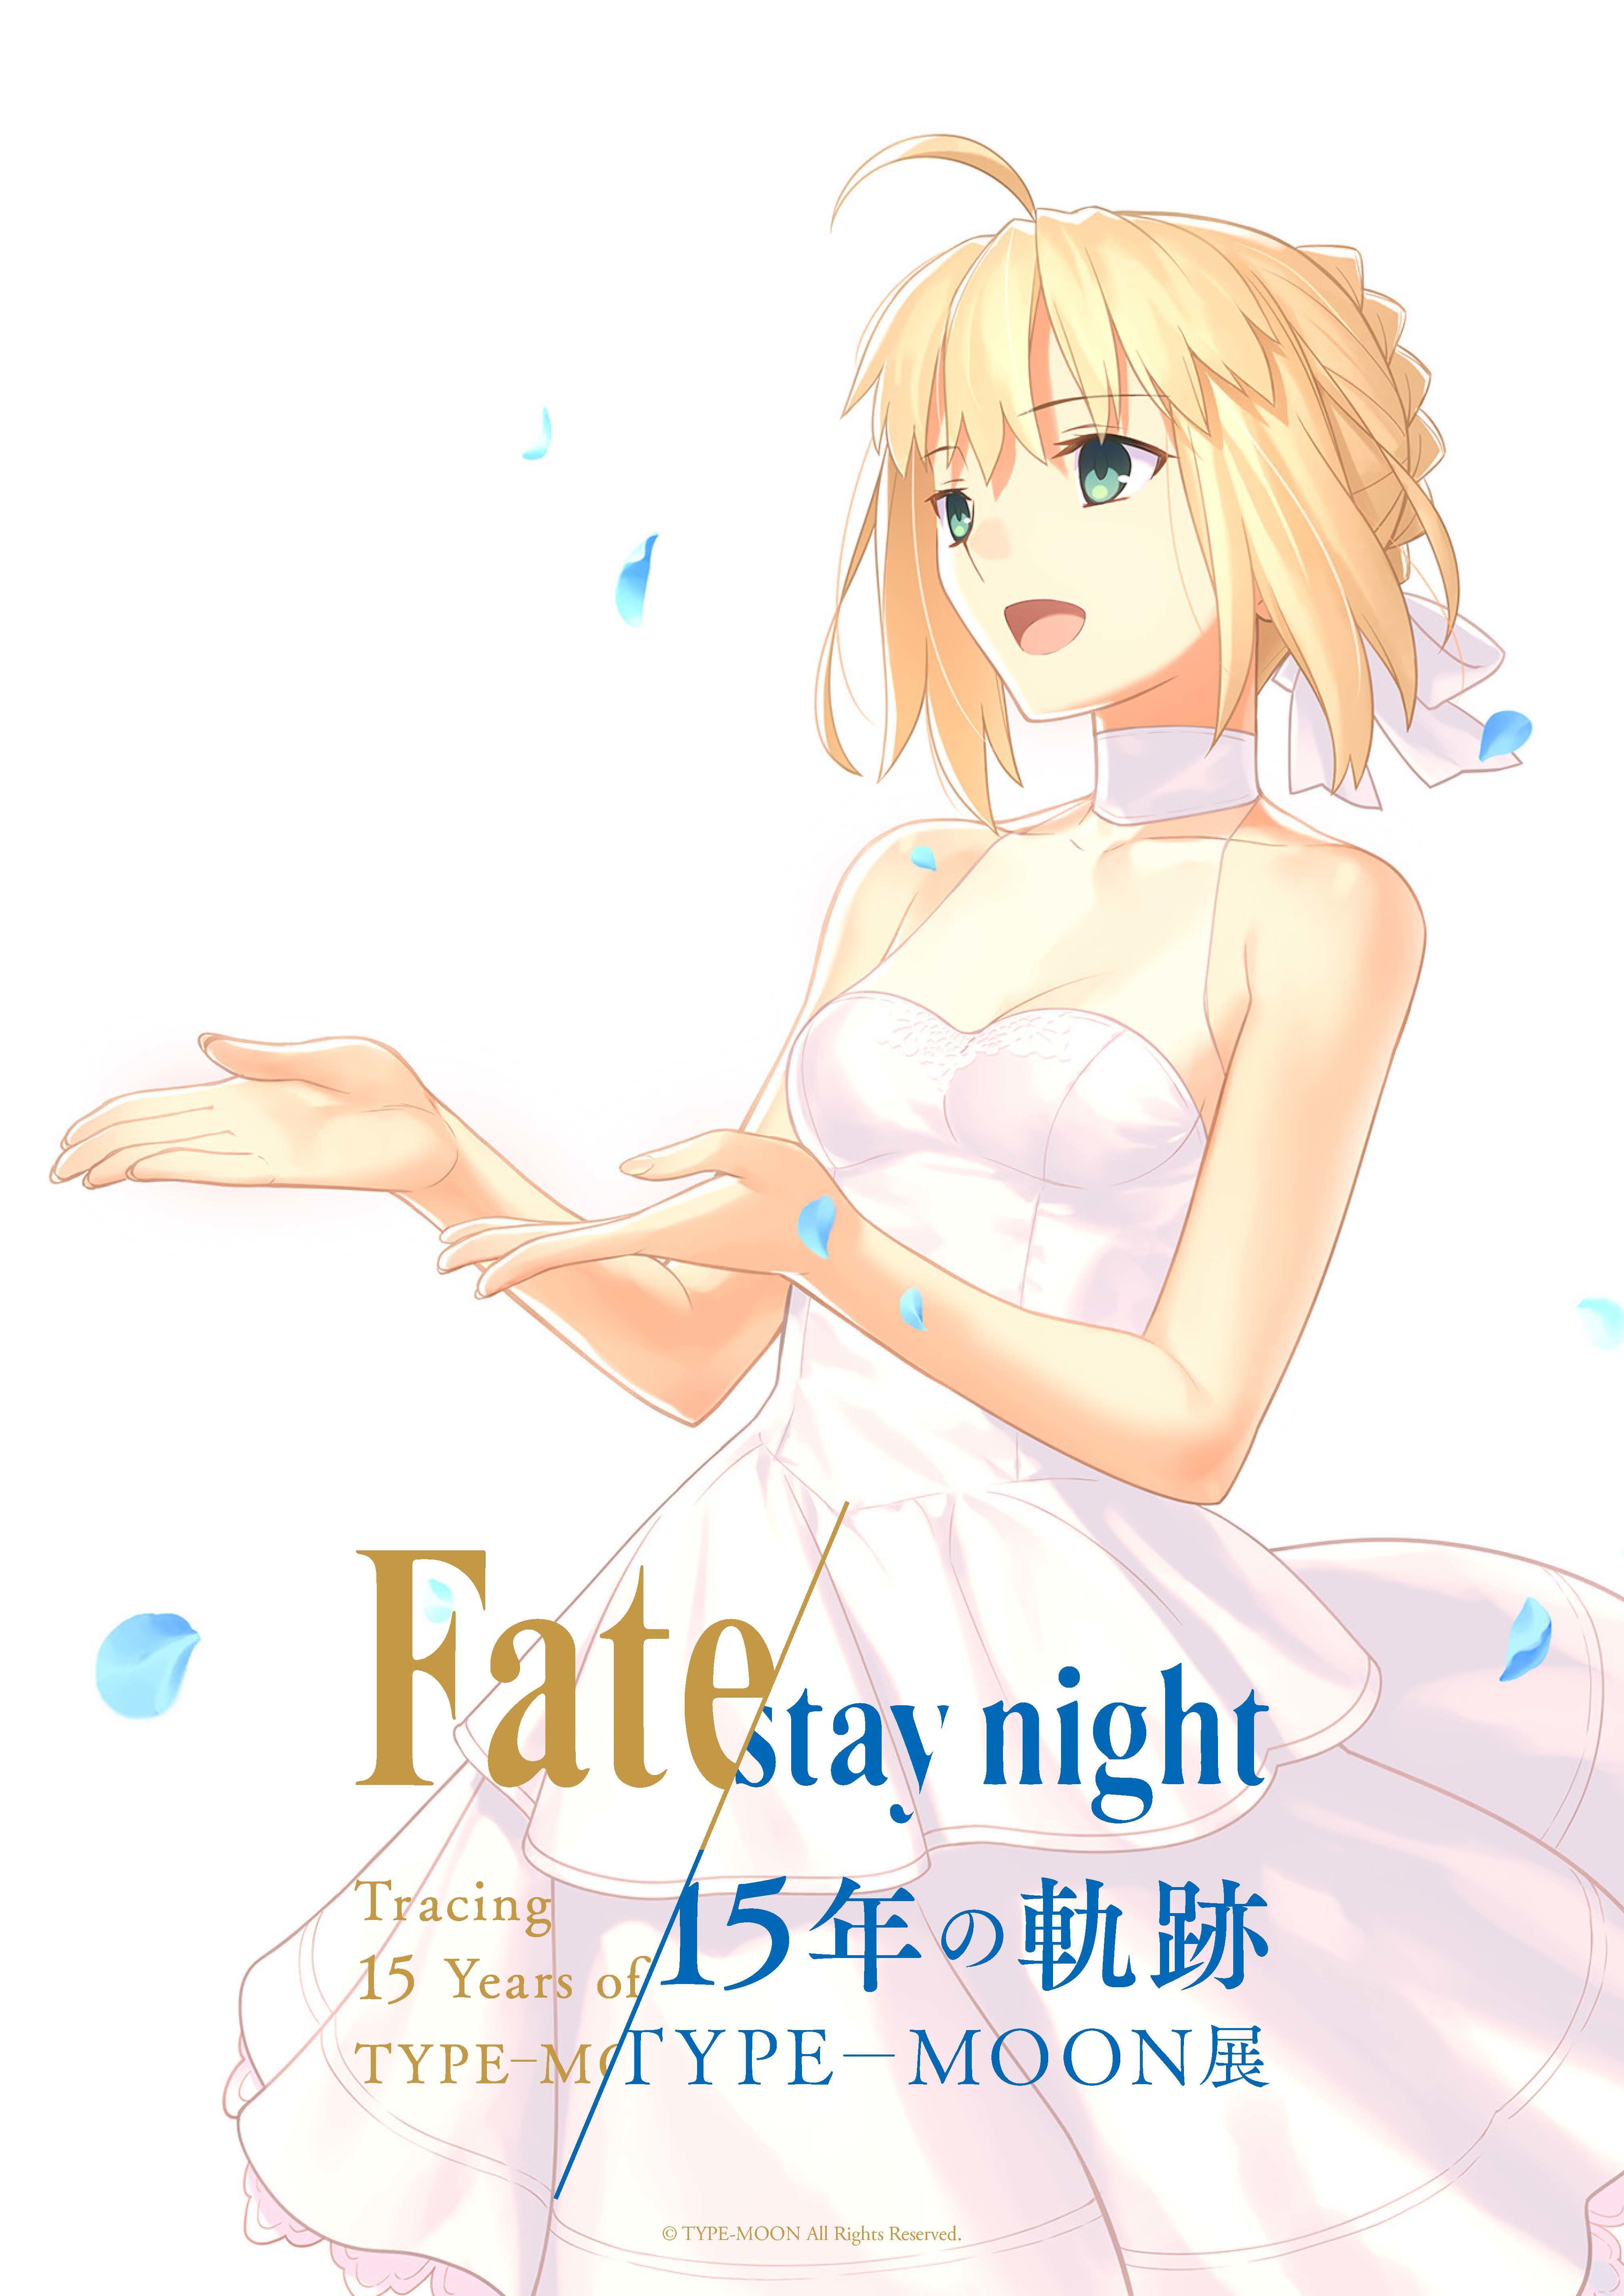 Fate Stay Night セイバー 遠坂凛 間桐桜を描き下ろし Type Moon展 Fate Stay ニコニコニュース